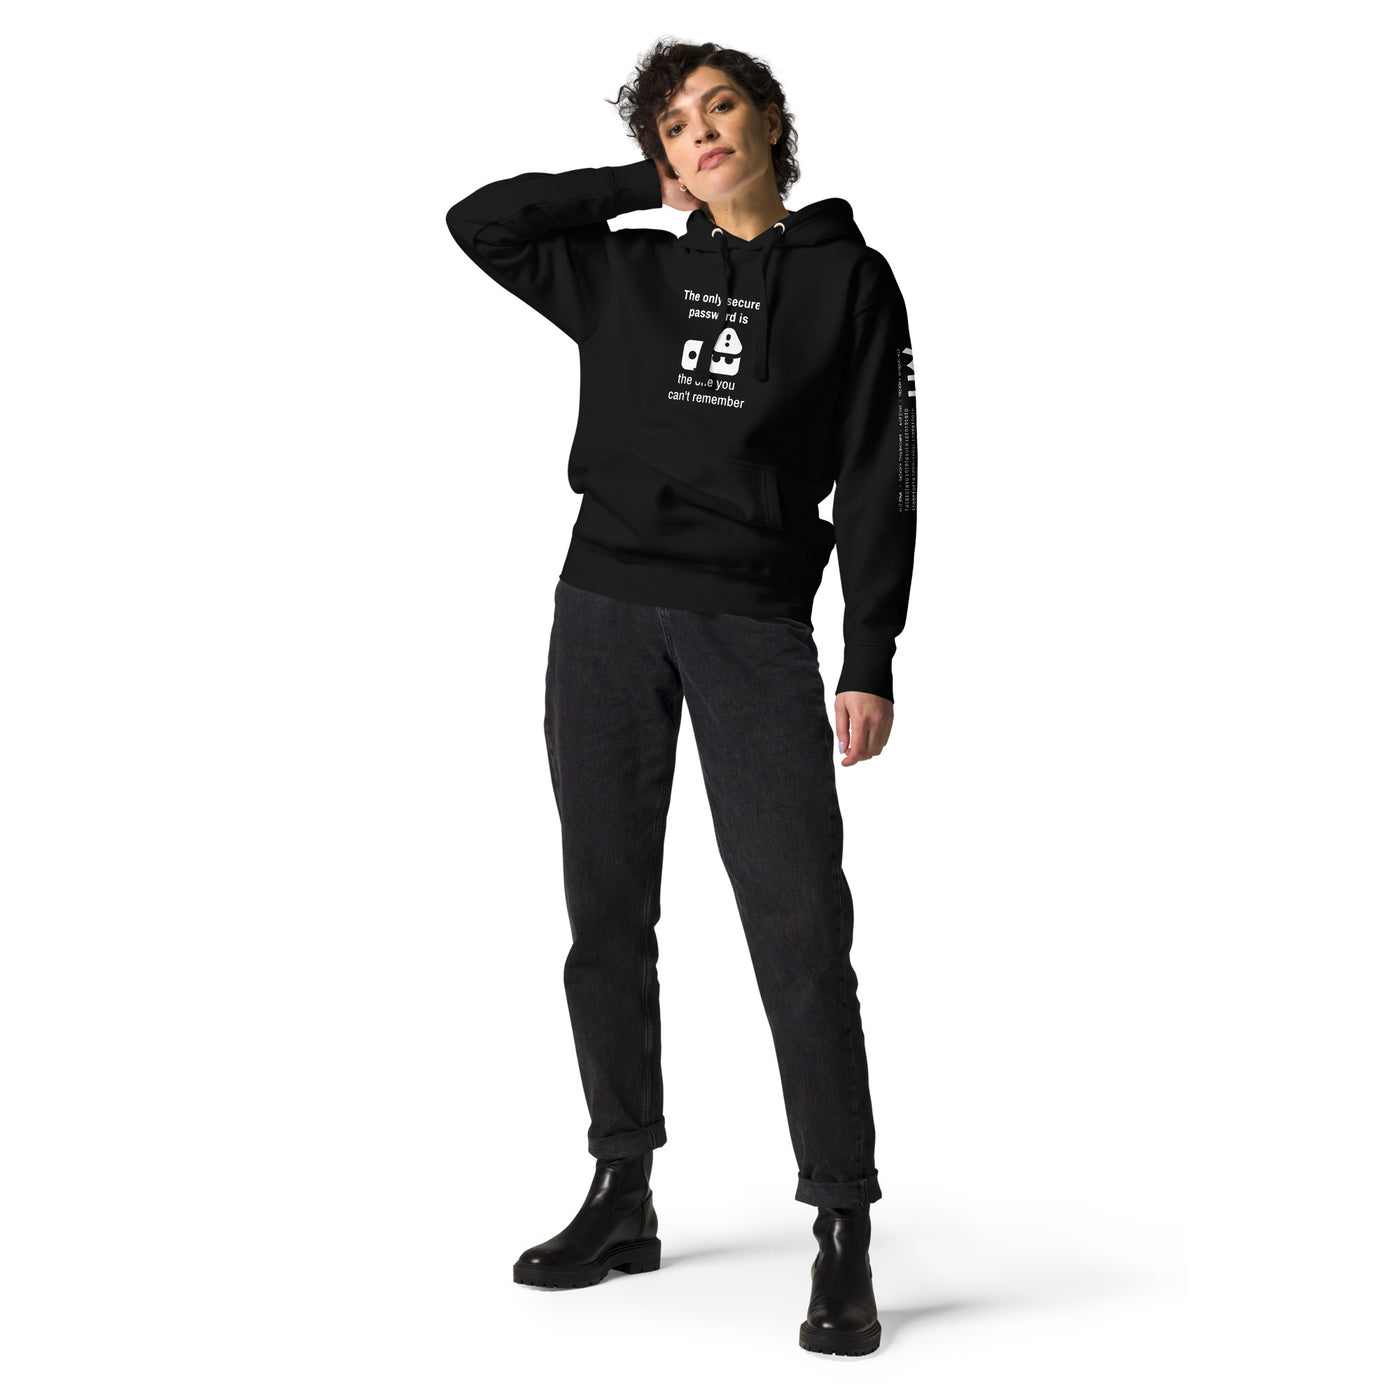 The only Secure Password V3 Unisex Hoodie